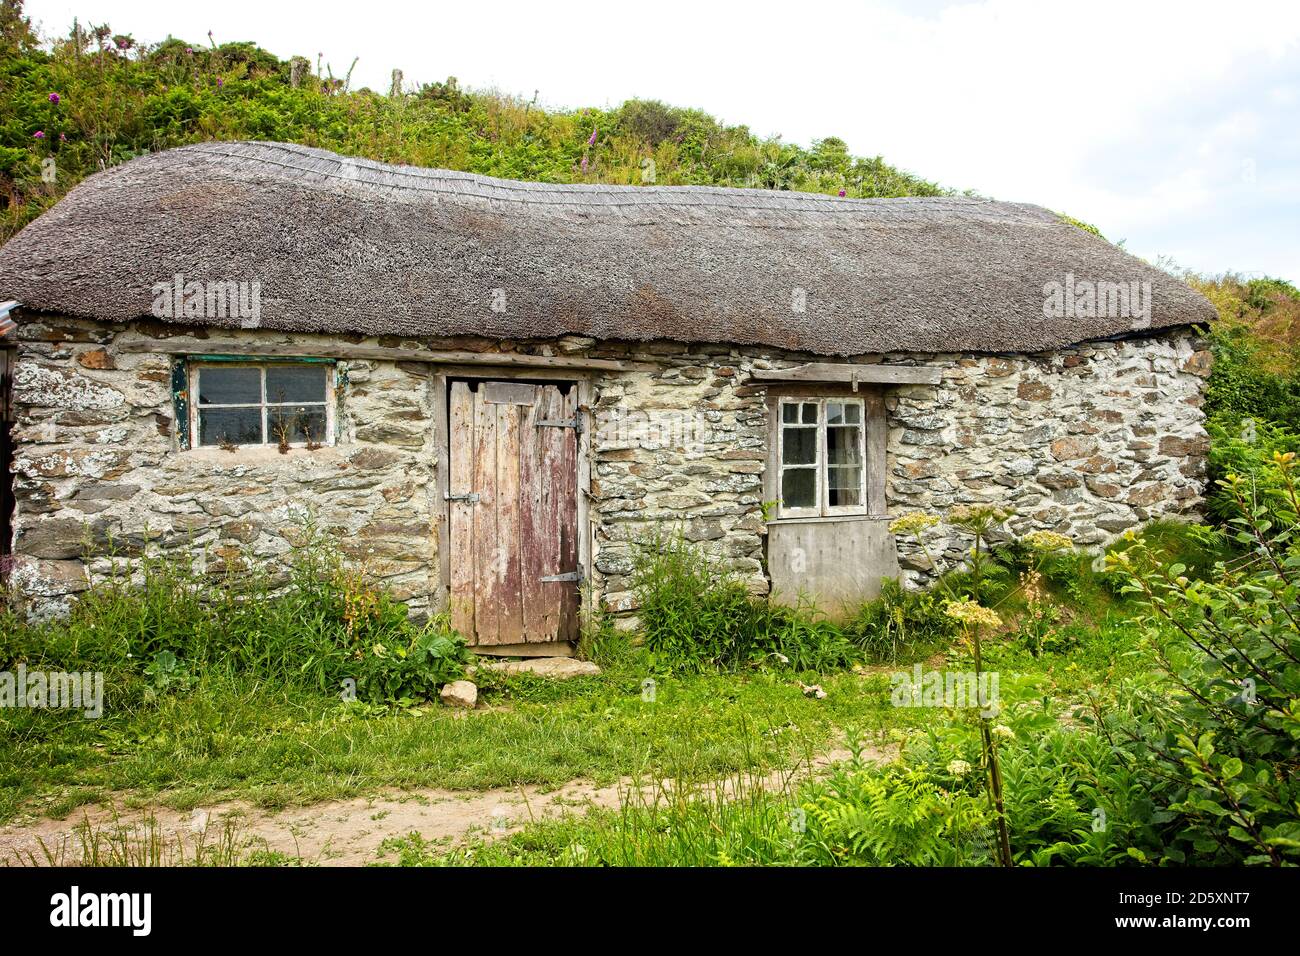 An ancient, thatched, fisherman's hut, Prussia Cove, Cornwall, England, UK. Stock Photo